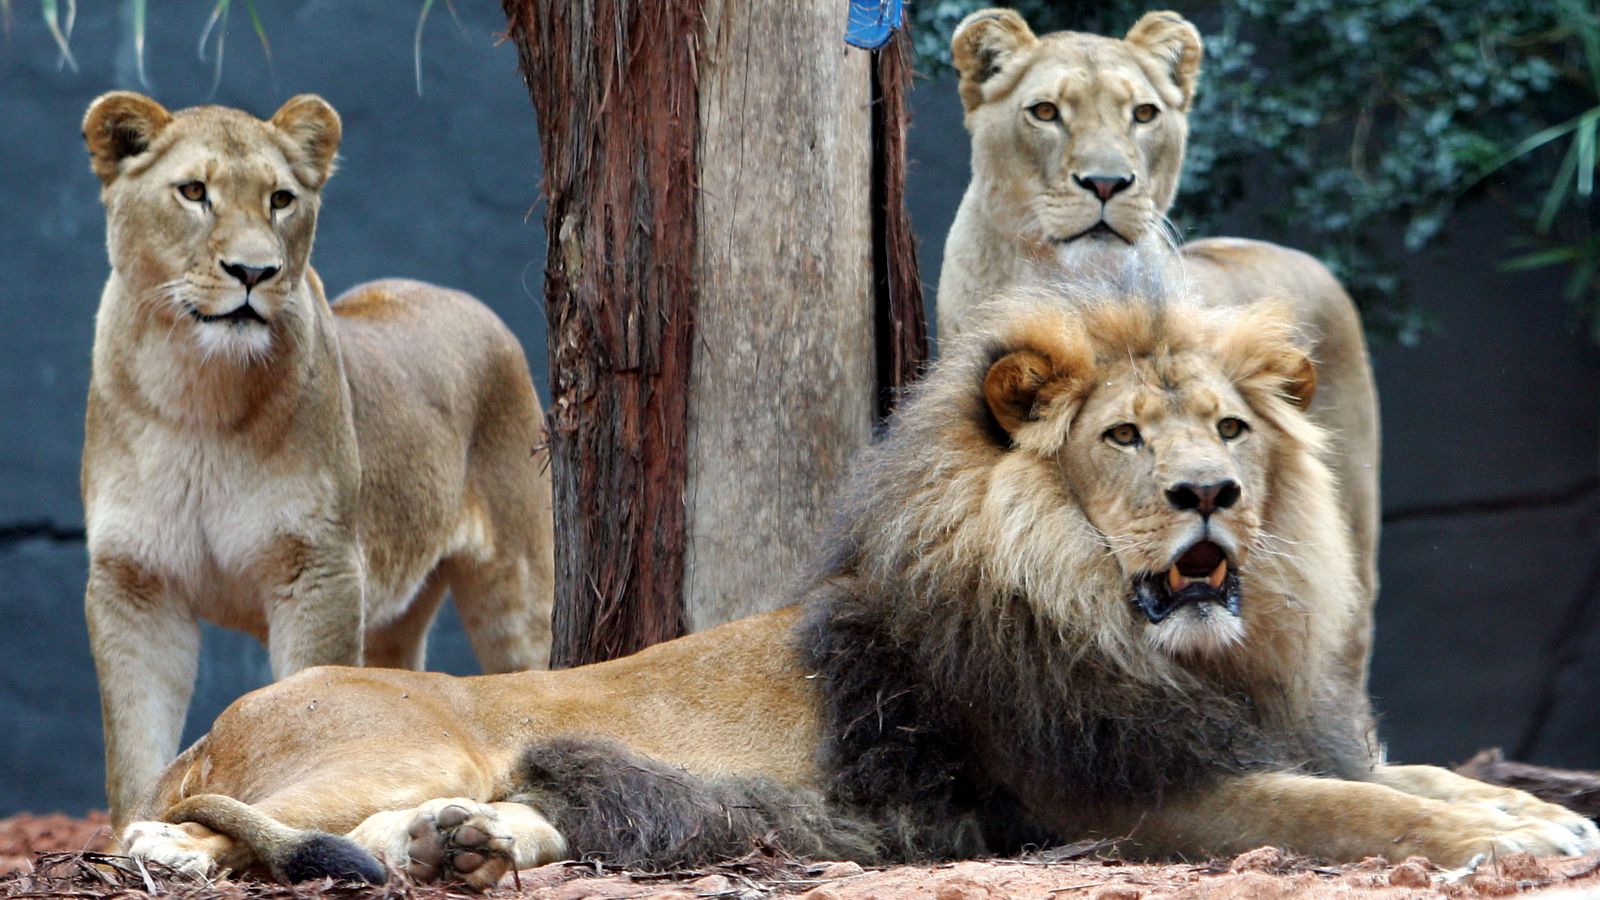 Five lions escape Sydney's Taronga Zoo forcing it to issue 'code one' alert and rush overnight guests to safety